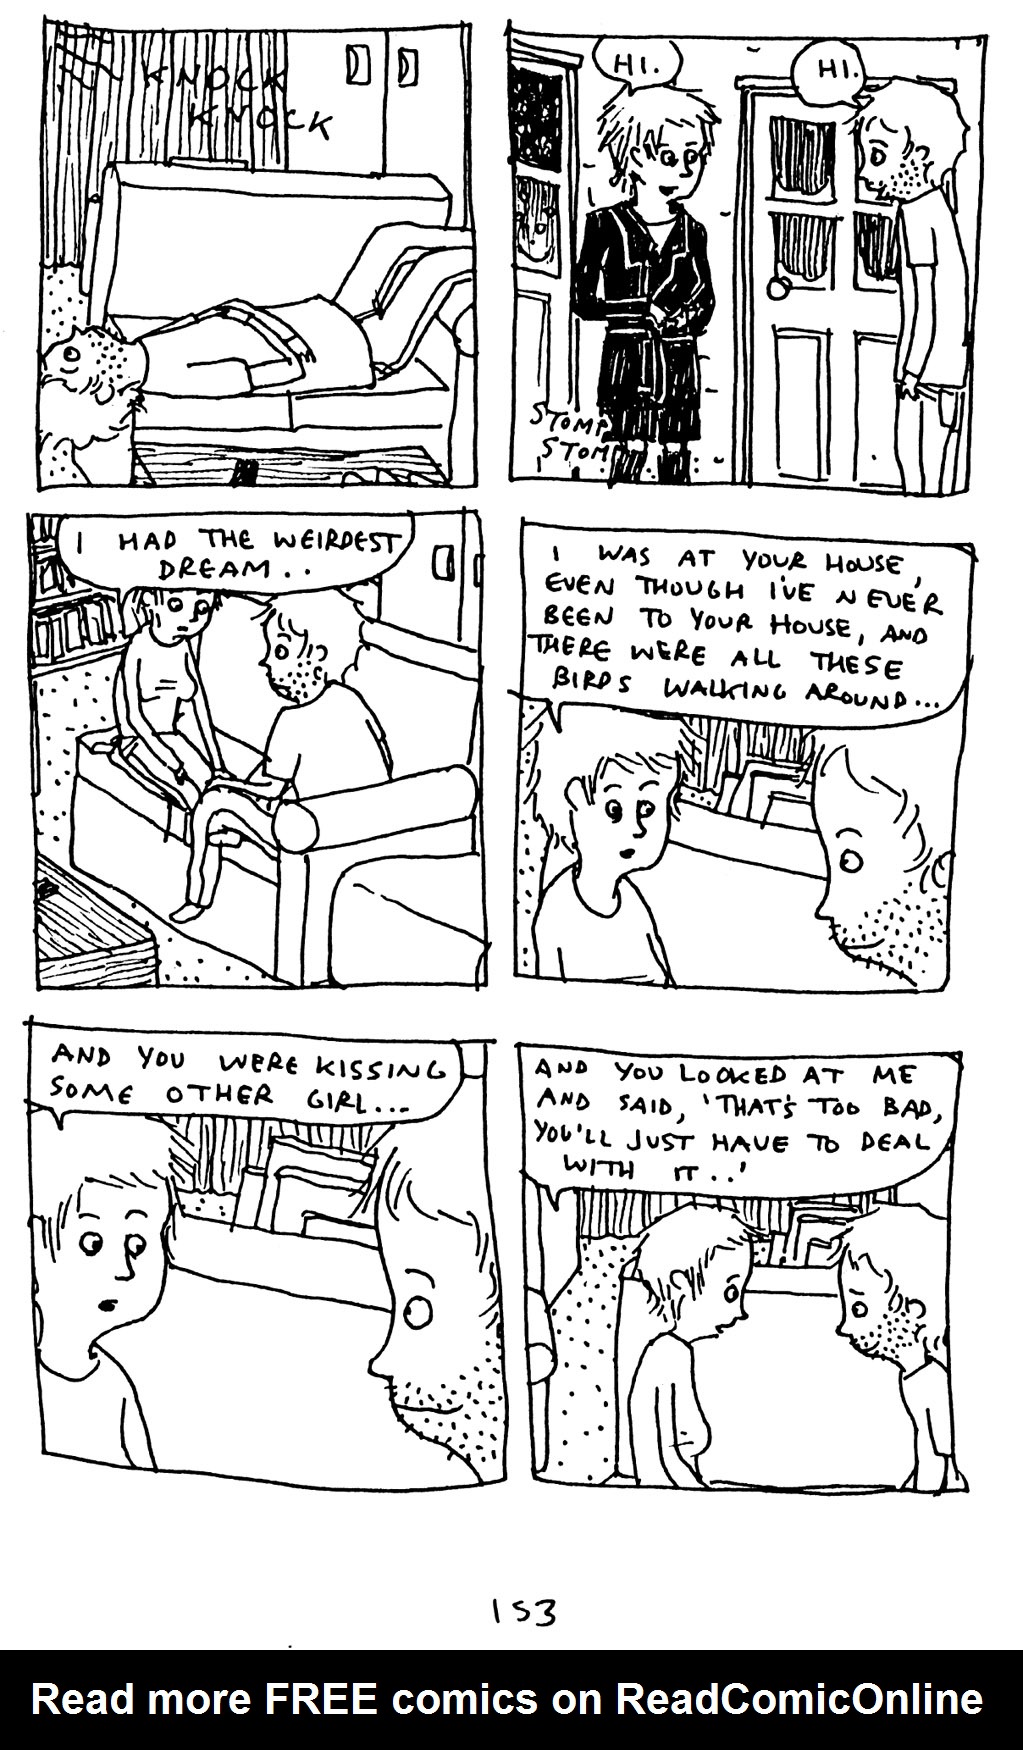 Read online Unlikely comic -  Issue # TPB (Part 2) - 67